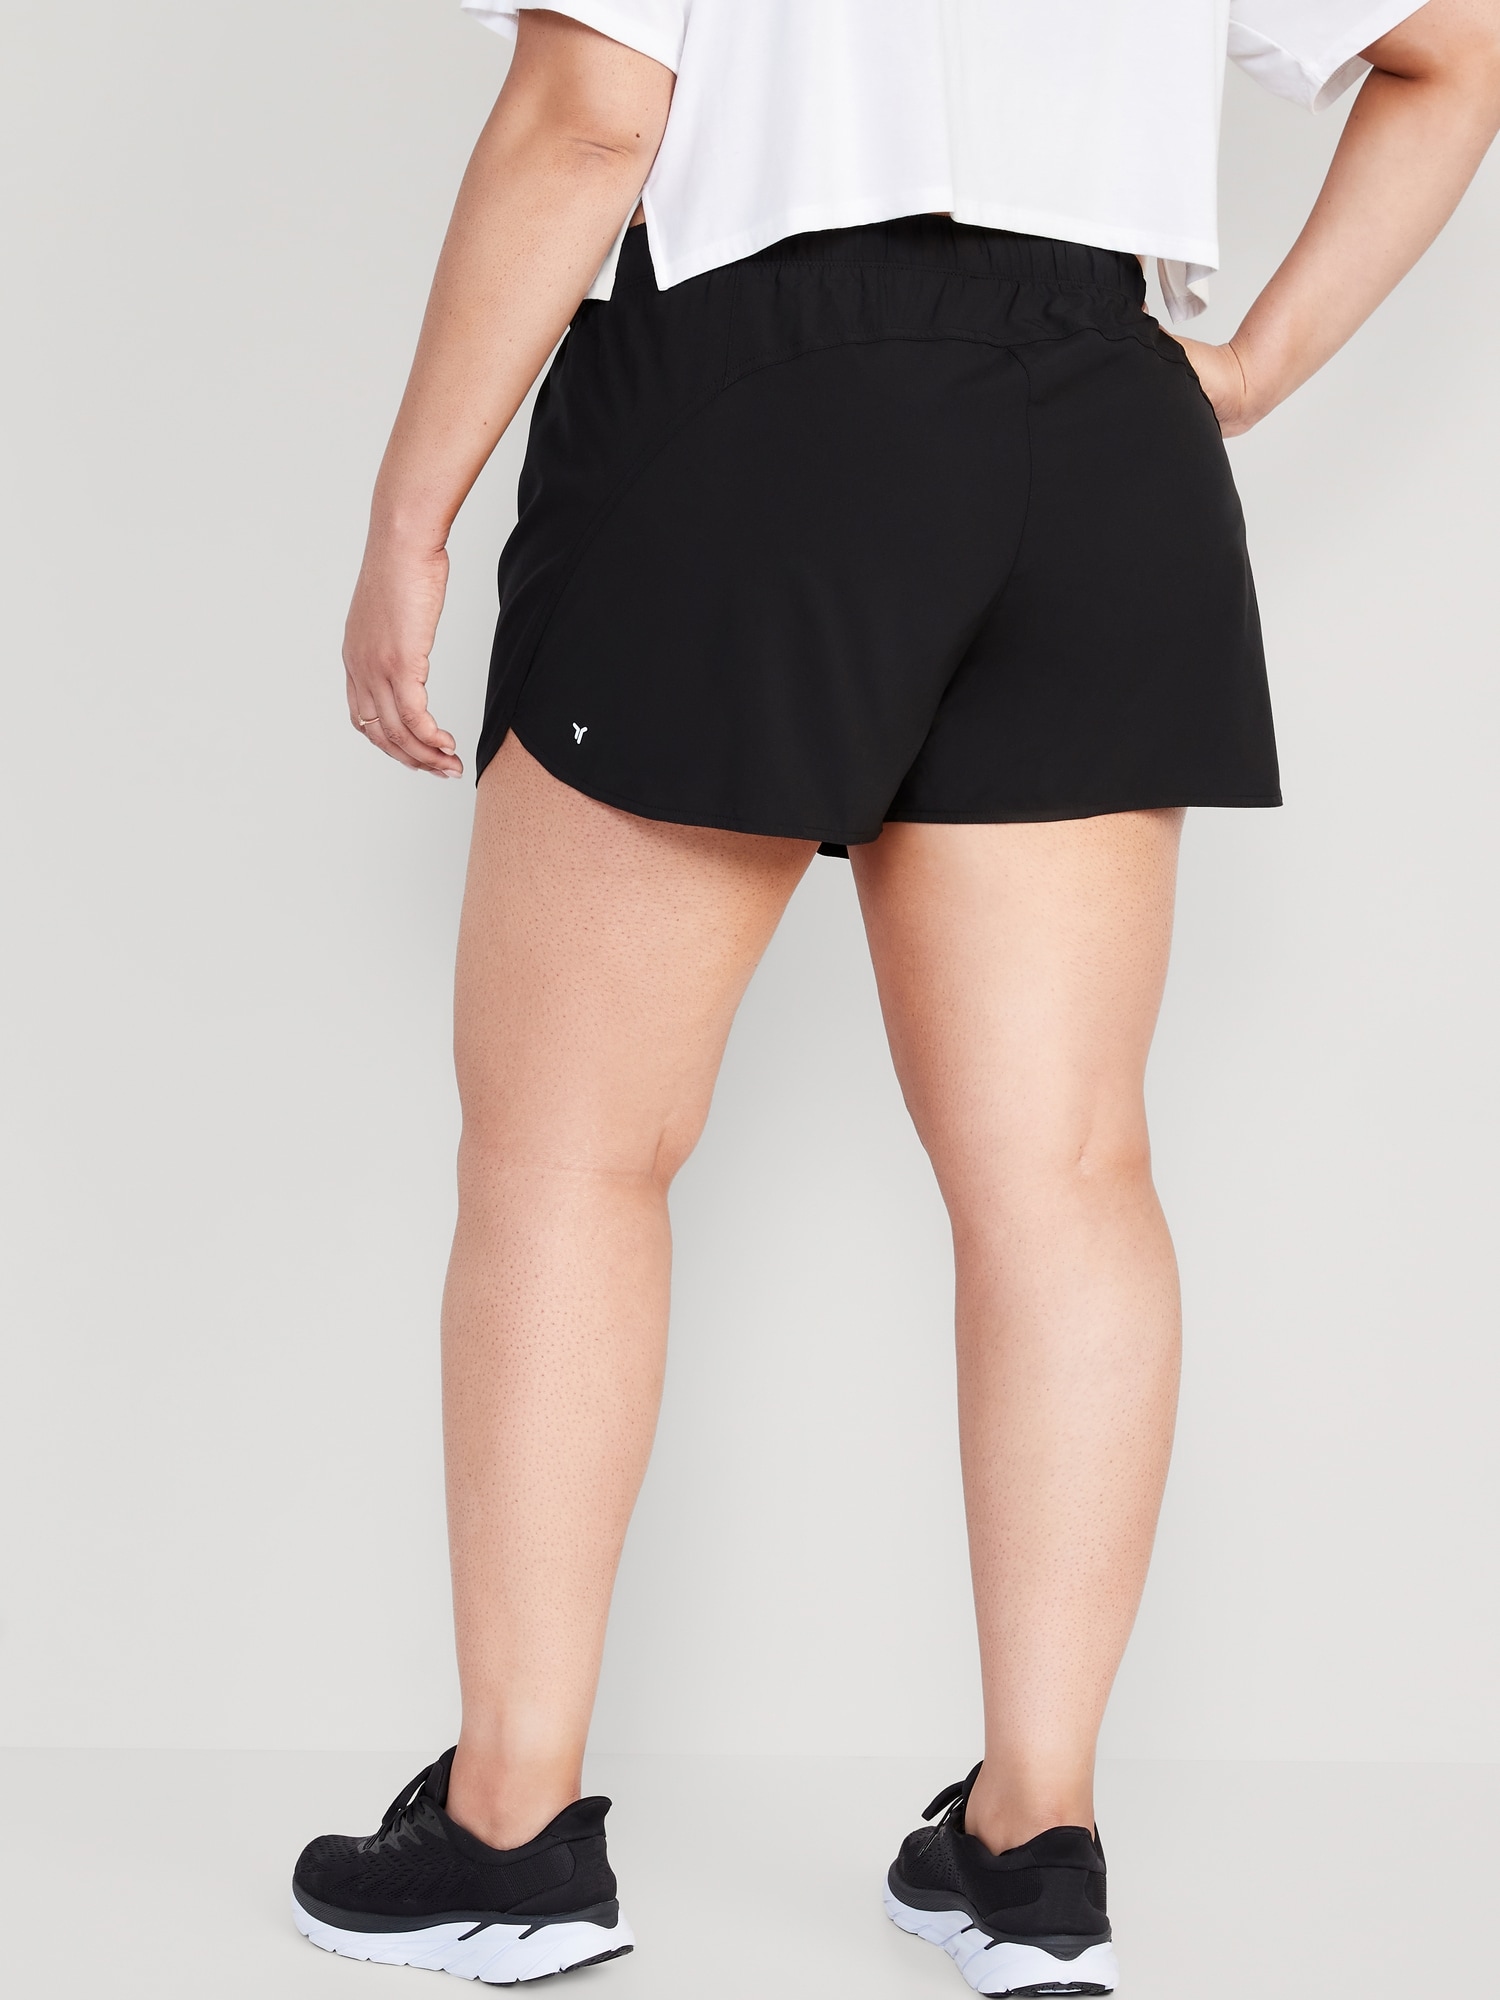 Womens Sexy Fitness Workout Shorts Running Gym Shorts – Loving Lane Co